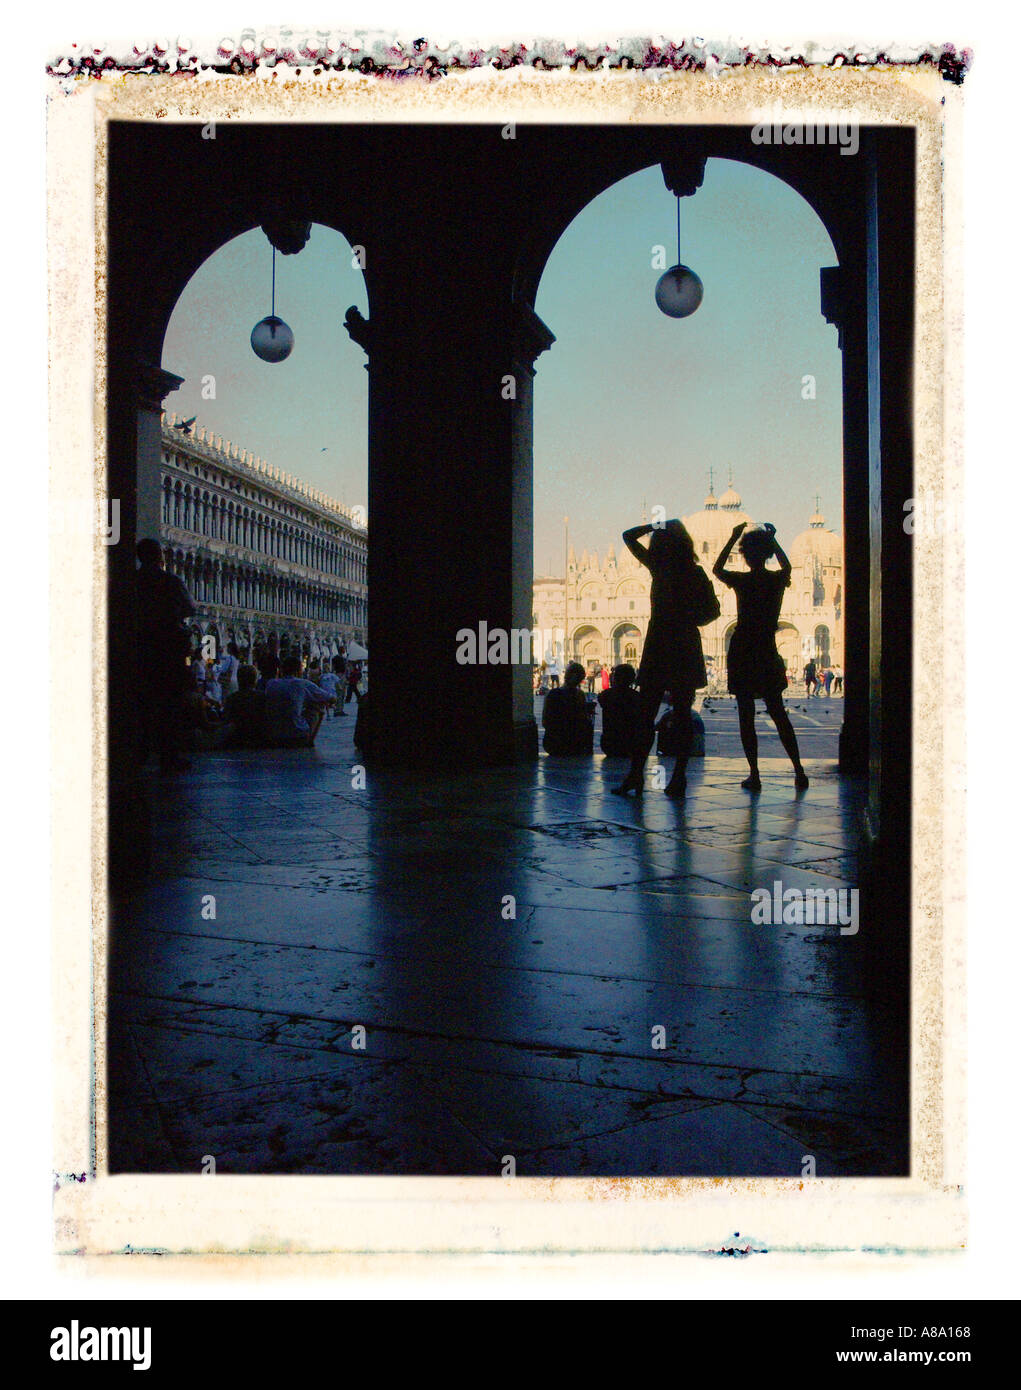 Two figures silhouetted in archway in front of Basilica San Marco Venice Italy Stock Photo